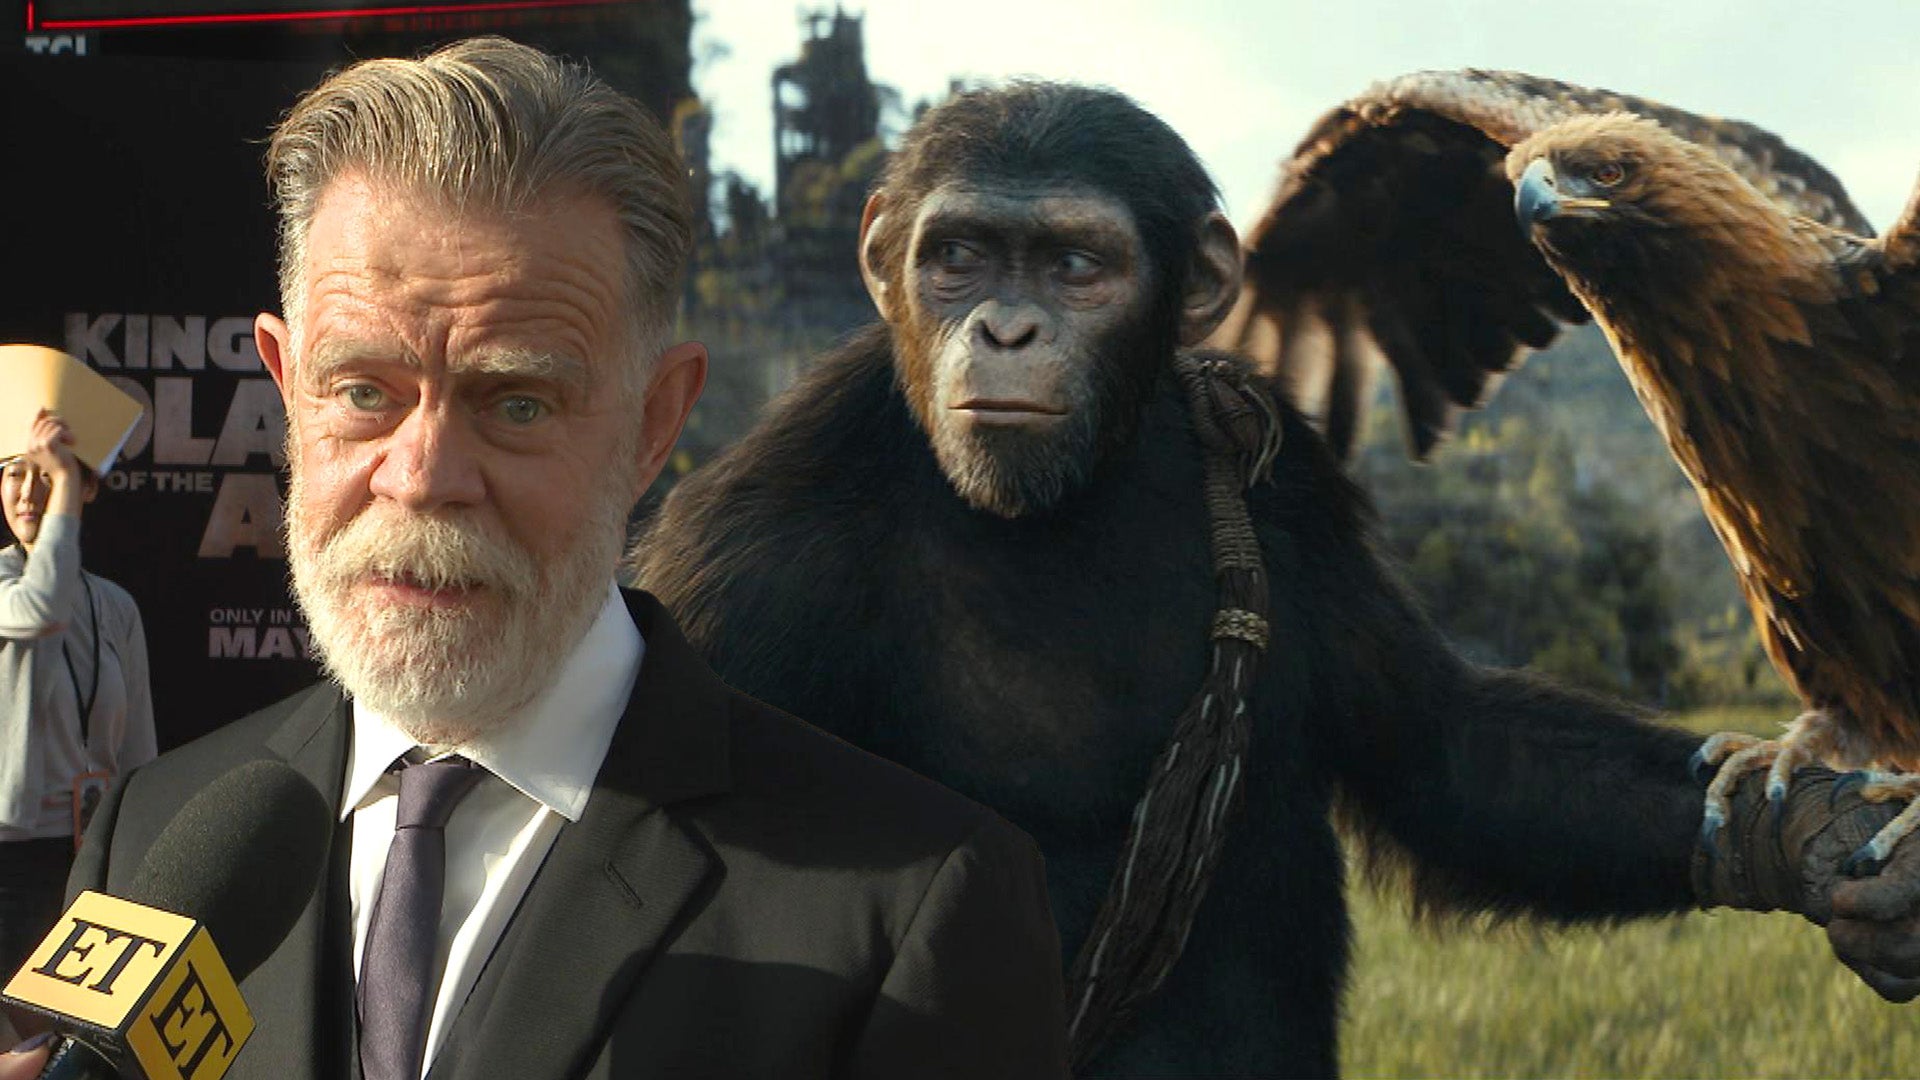 'The Kingdom of the Planet of the Apes': William H. Macy Calls Joining Franchise 'Gratifying'